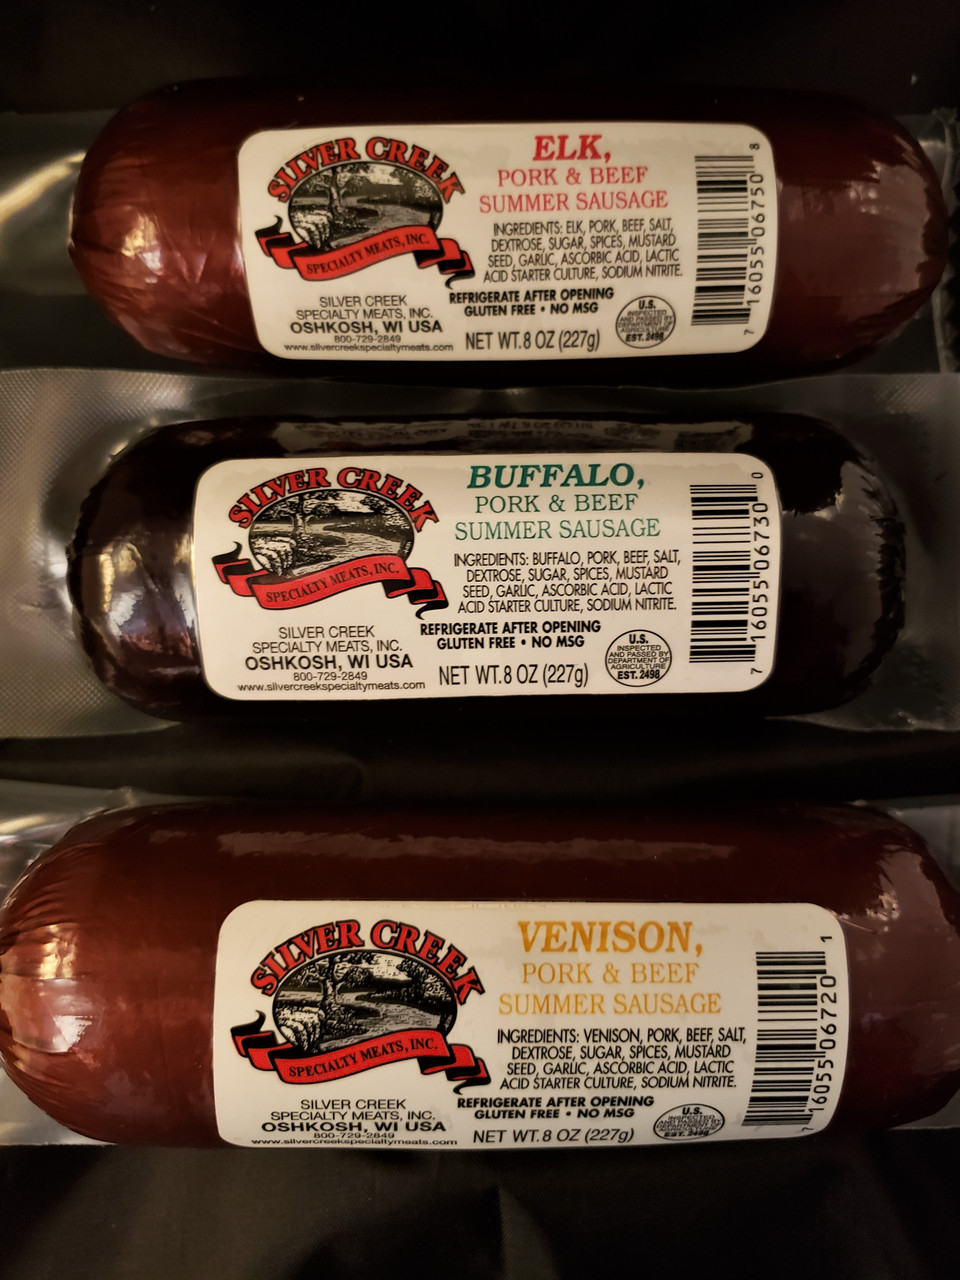 Buffalo and Venison sausage available in 8 oz sizes too.